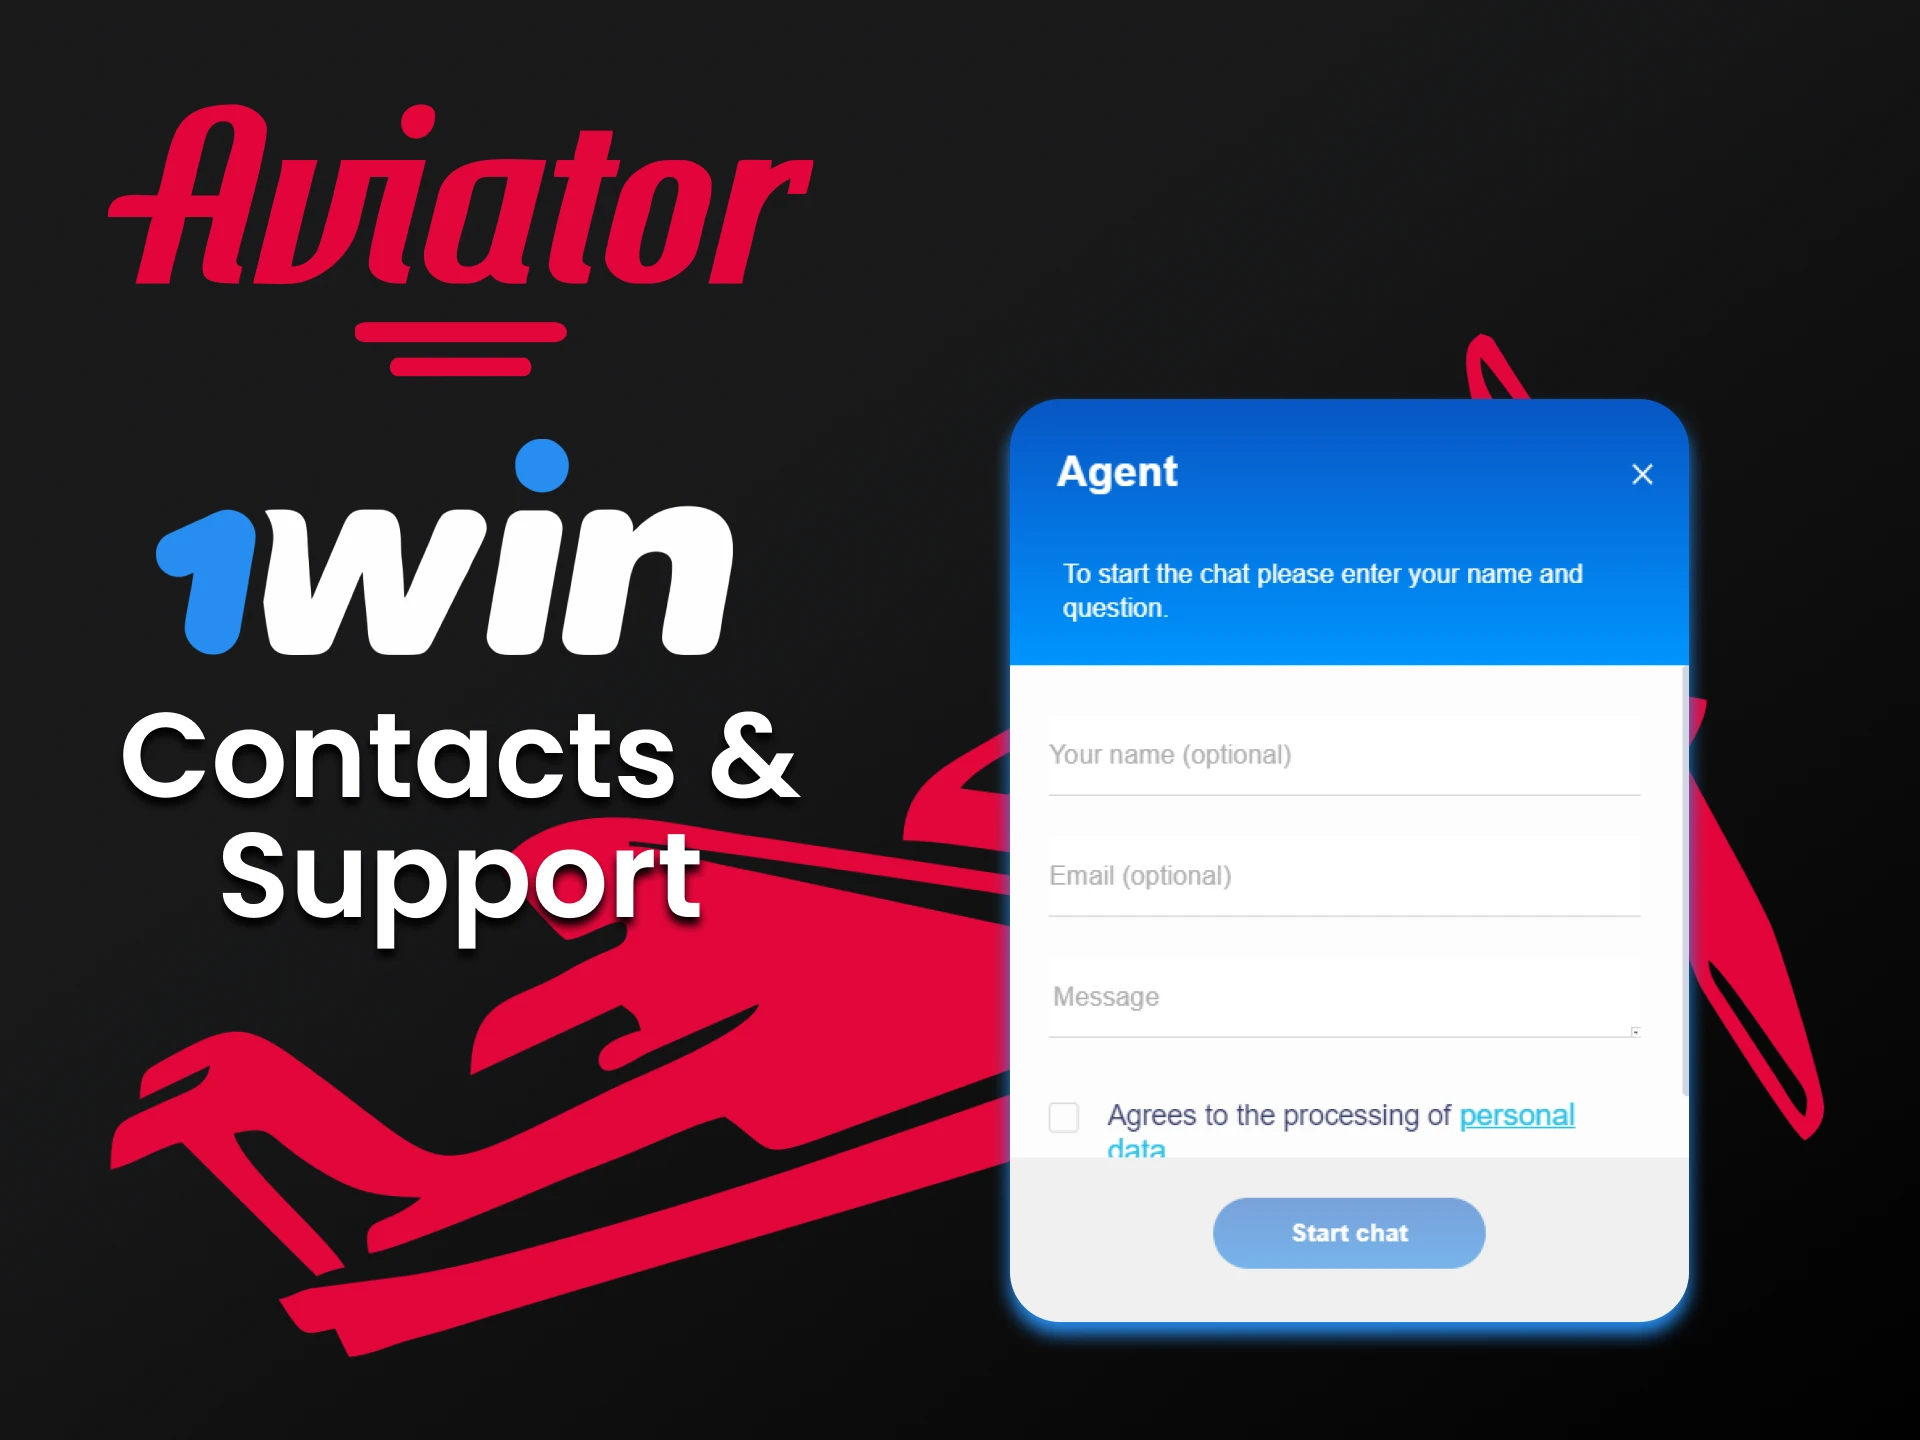 If you have any questions, you can contact 1win support.